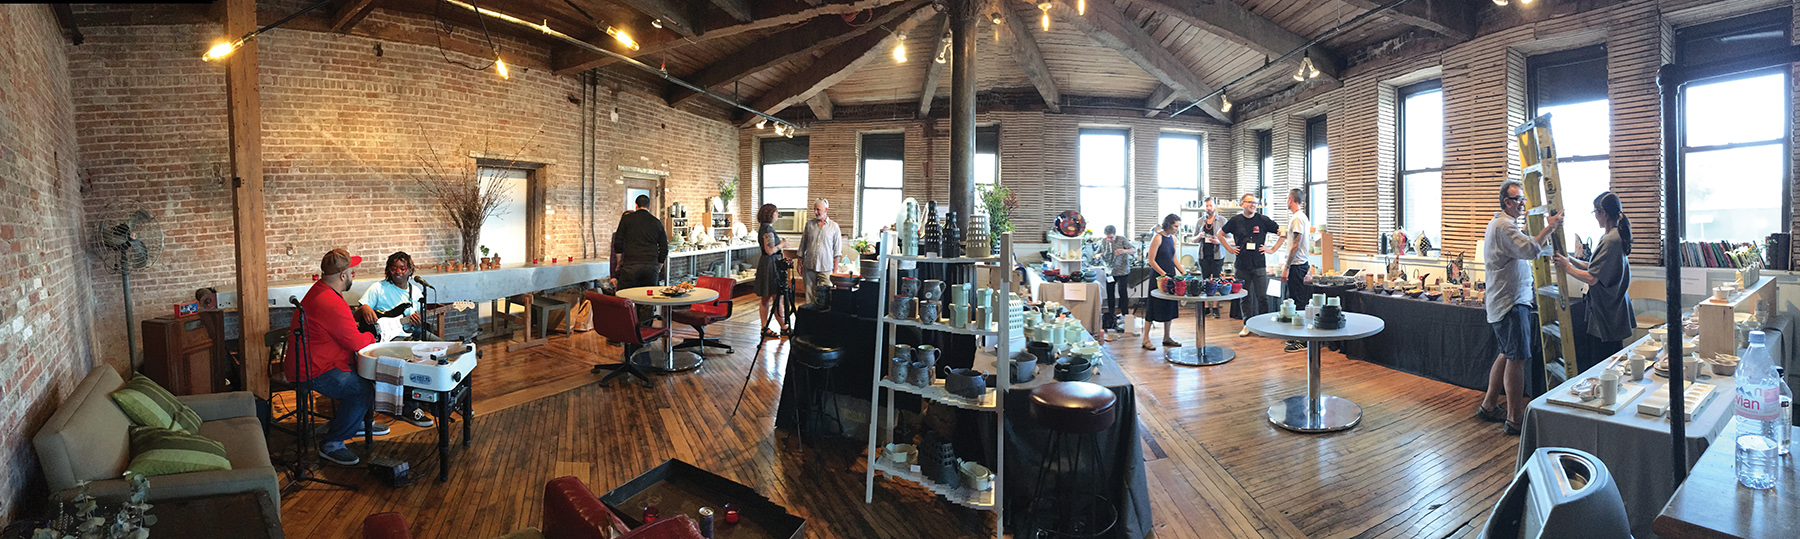 Brooklyn Pottery Invitational, Old American Can Factory, Brooklyn, September 2, 2017. Photograph by Lois Aronow.